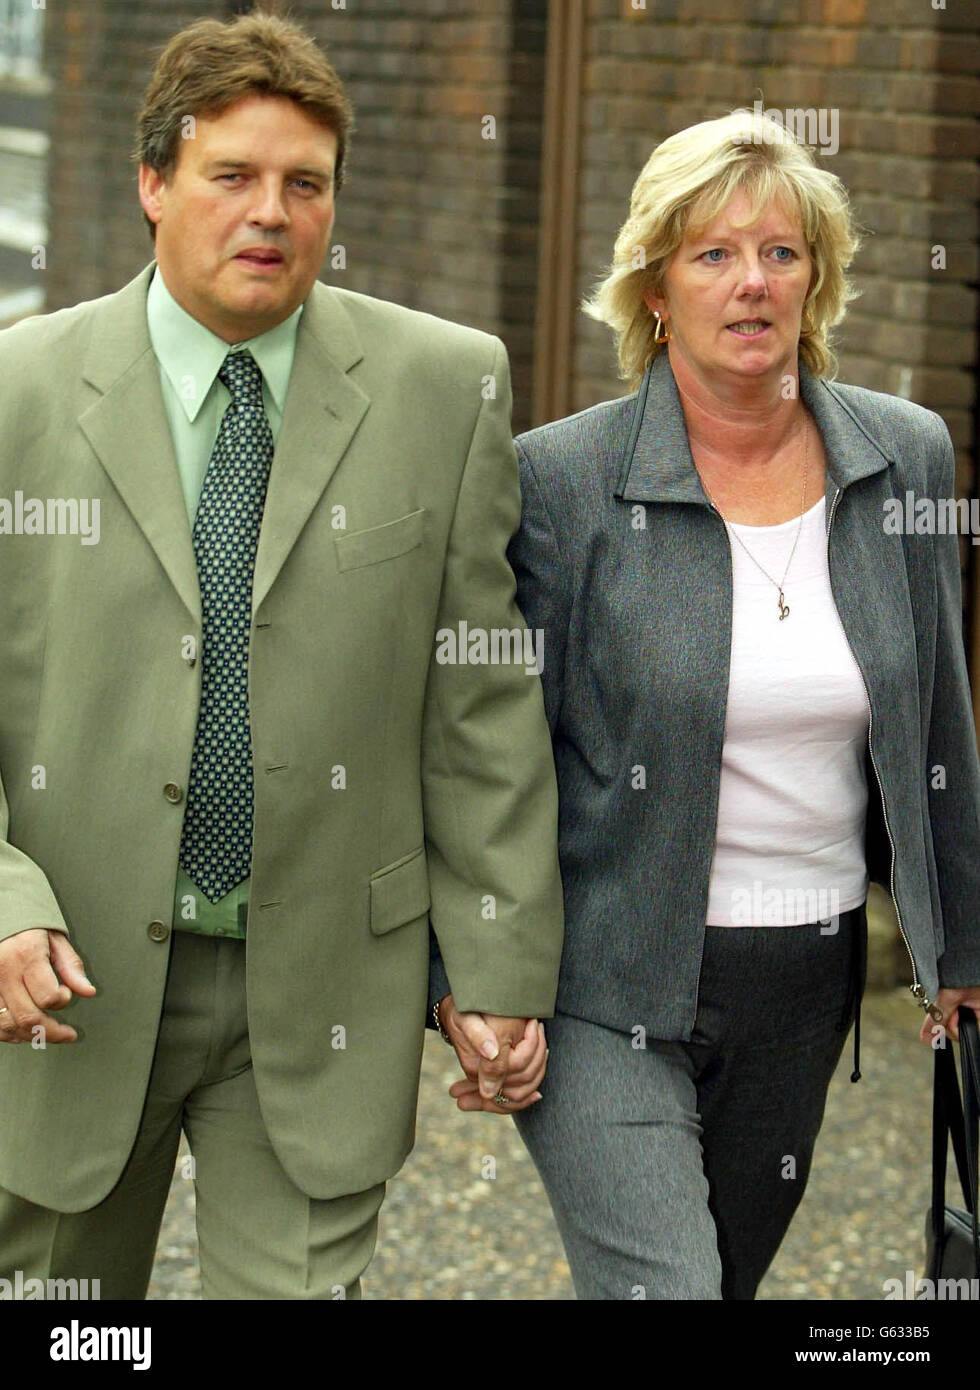 The parents of missing schoolgirl Danielle Jones, Tony and Linda Jones, arrive at Chelmsford Crown Court, Essex, the start of the trial of Danielle's uncle, Stuart Campbell, 44, who is accused of her abduction and murder. * Danielle disappeared on June 18, 2001 shortly after leaving her home in East Tilbury, Essex to catch a bus to school. Her body has never been discovered. 10/10/02 Linda Jones told a jury that her daughter was mature and sensible and afraid of the dark .Danielle's uncle, Stuart Campbell, 44, a builder of Grays, Essex, denies abducting and murdering her. Stock Photo